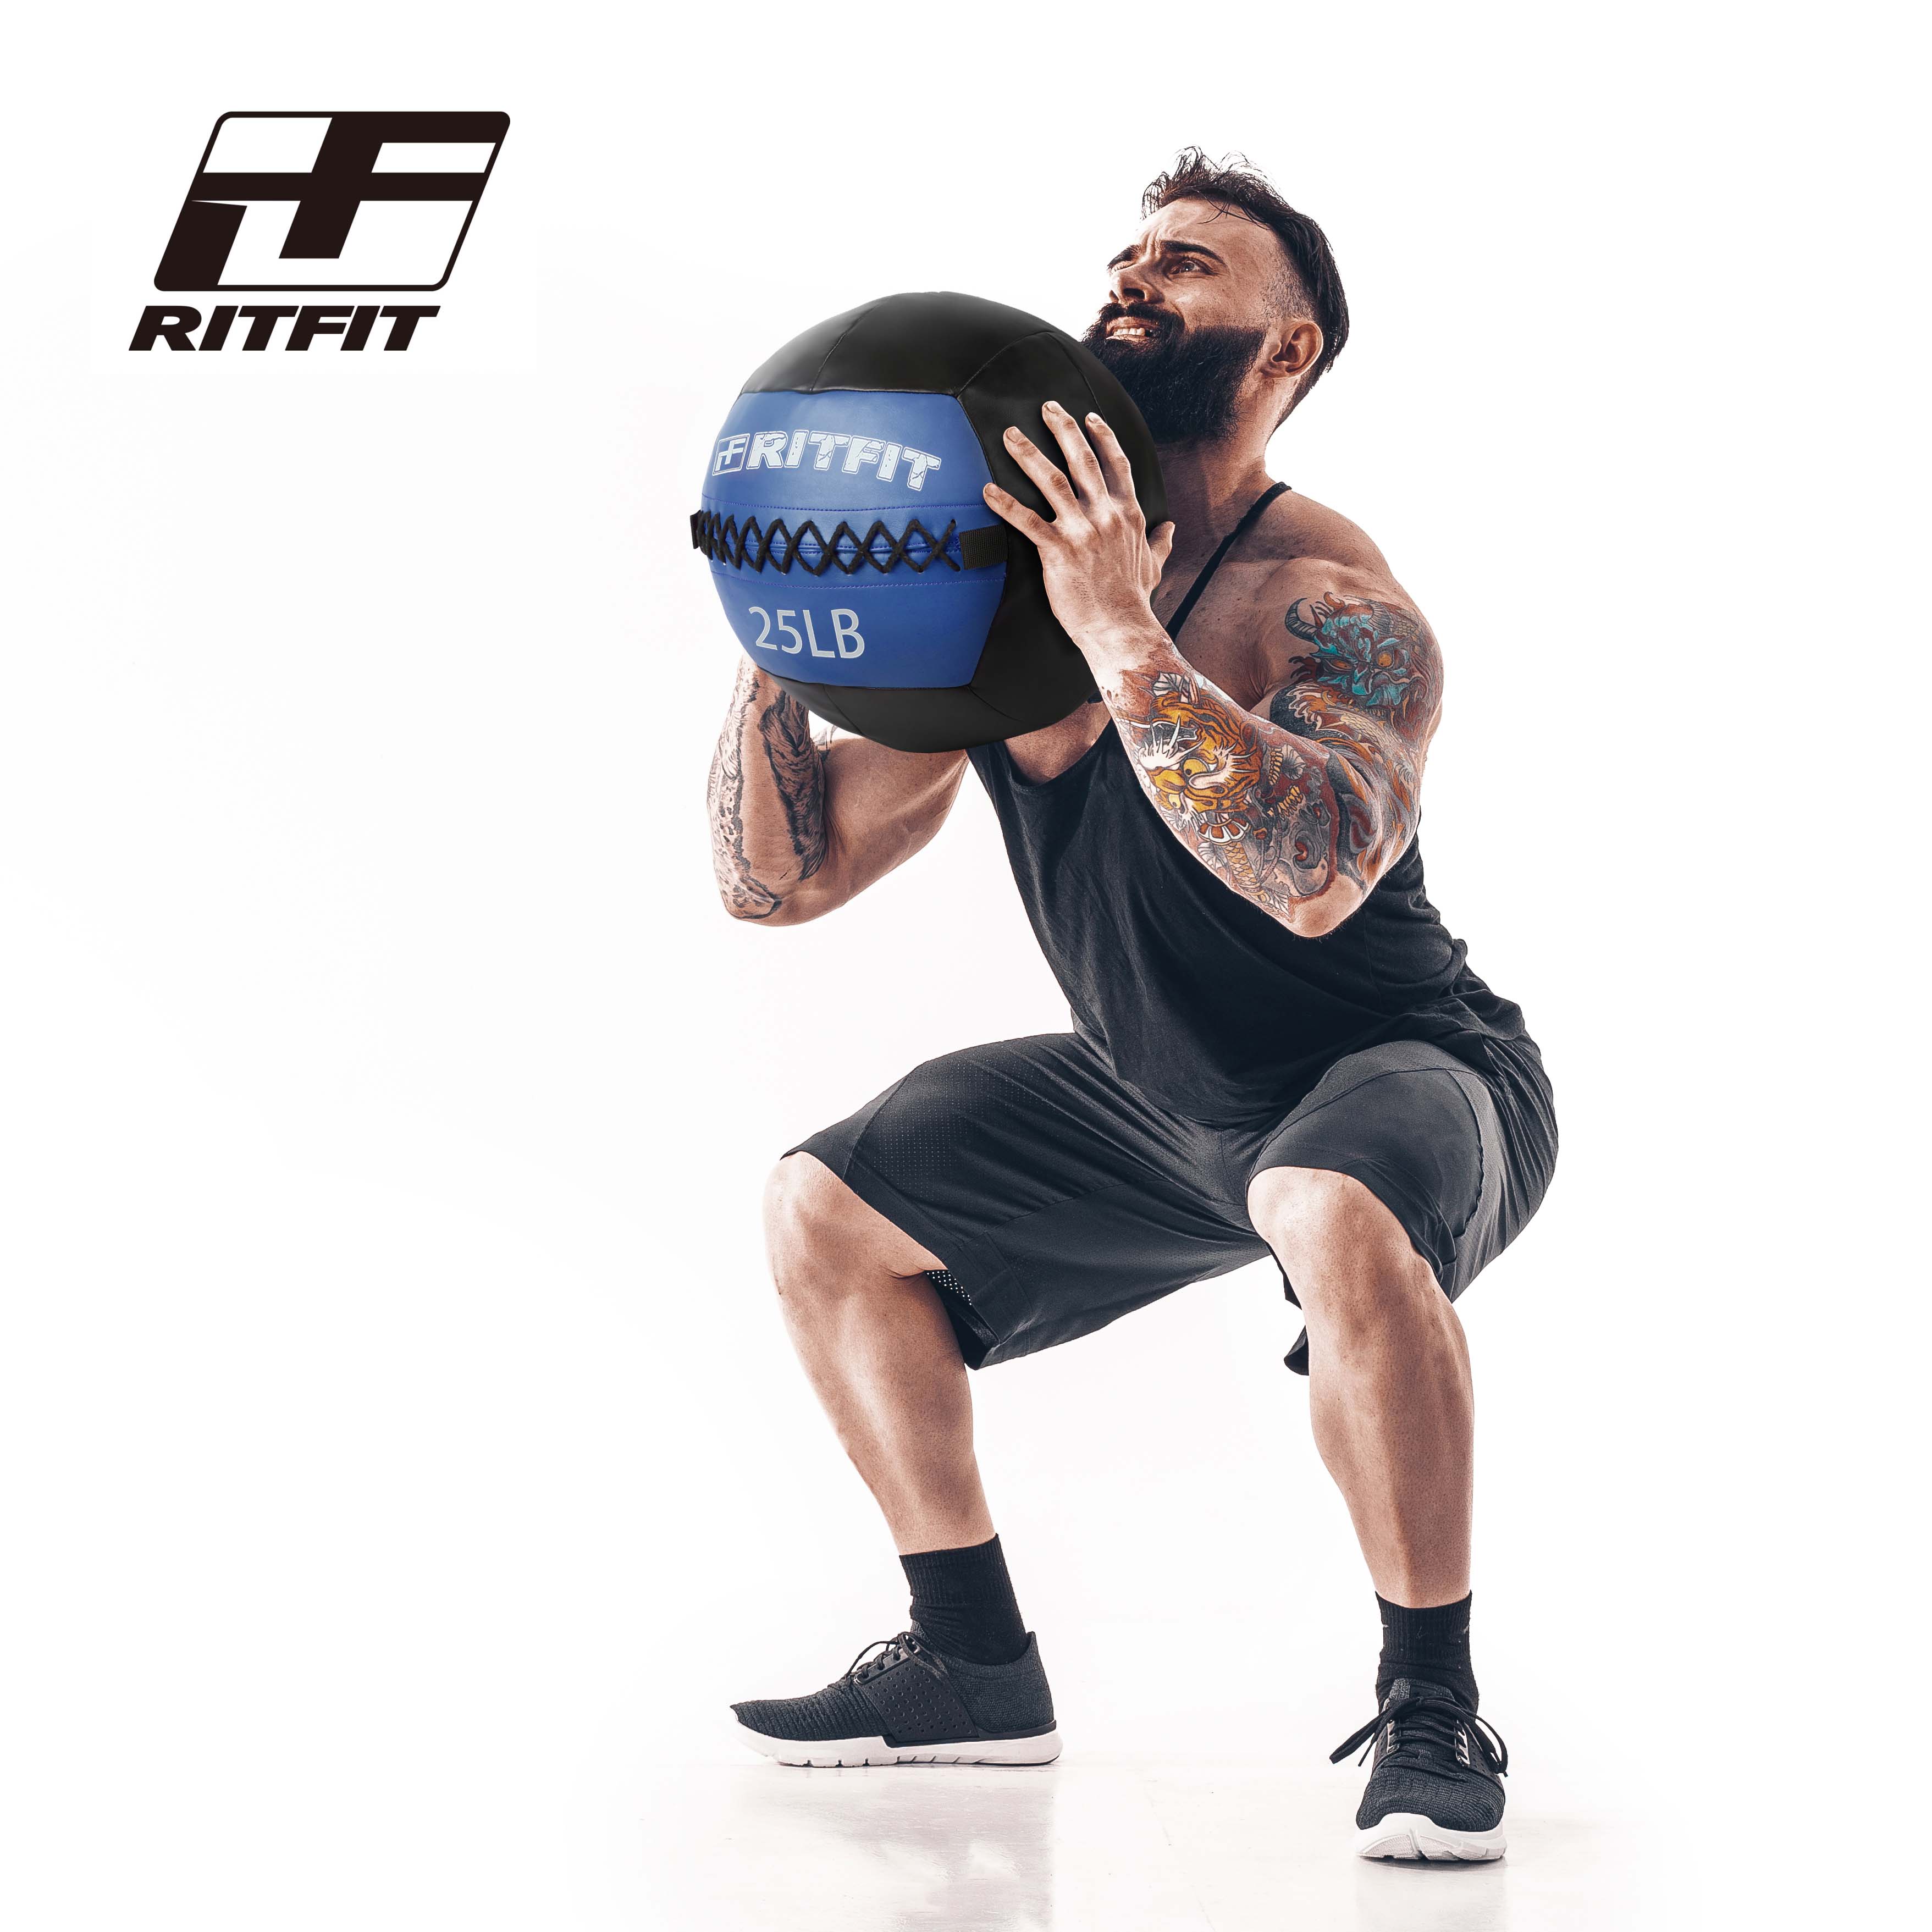 RitFit Soft Leather Medicine Wall Ball, Single and Bundle Offers Weight RitFit 